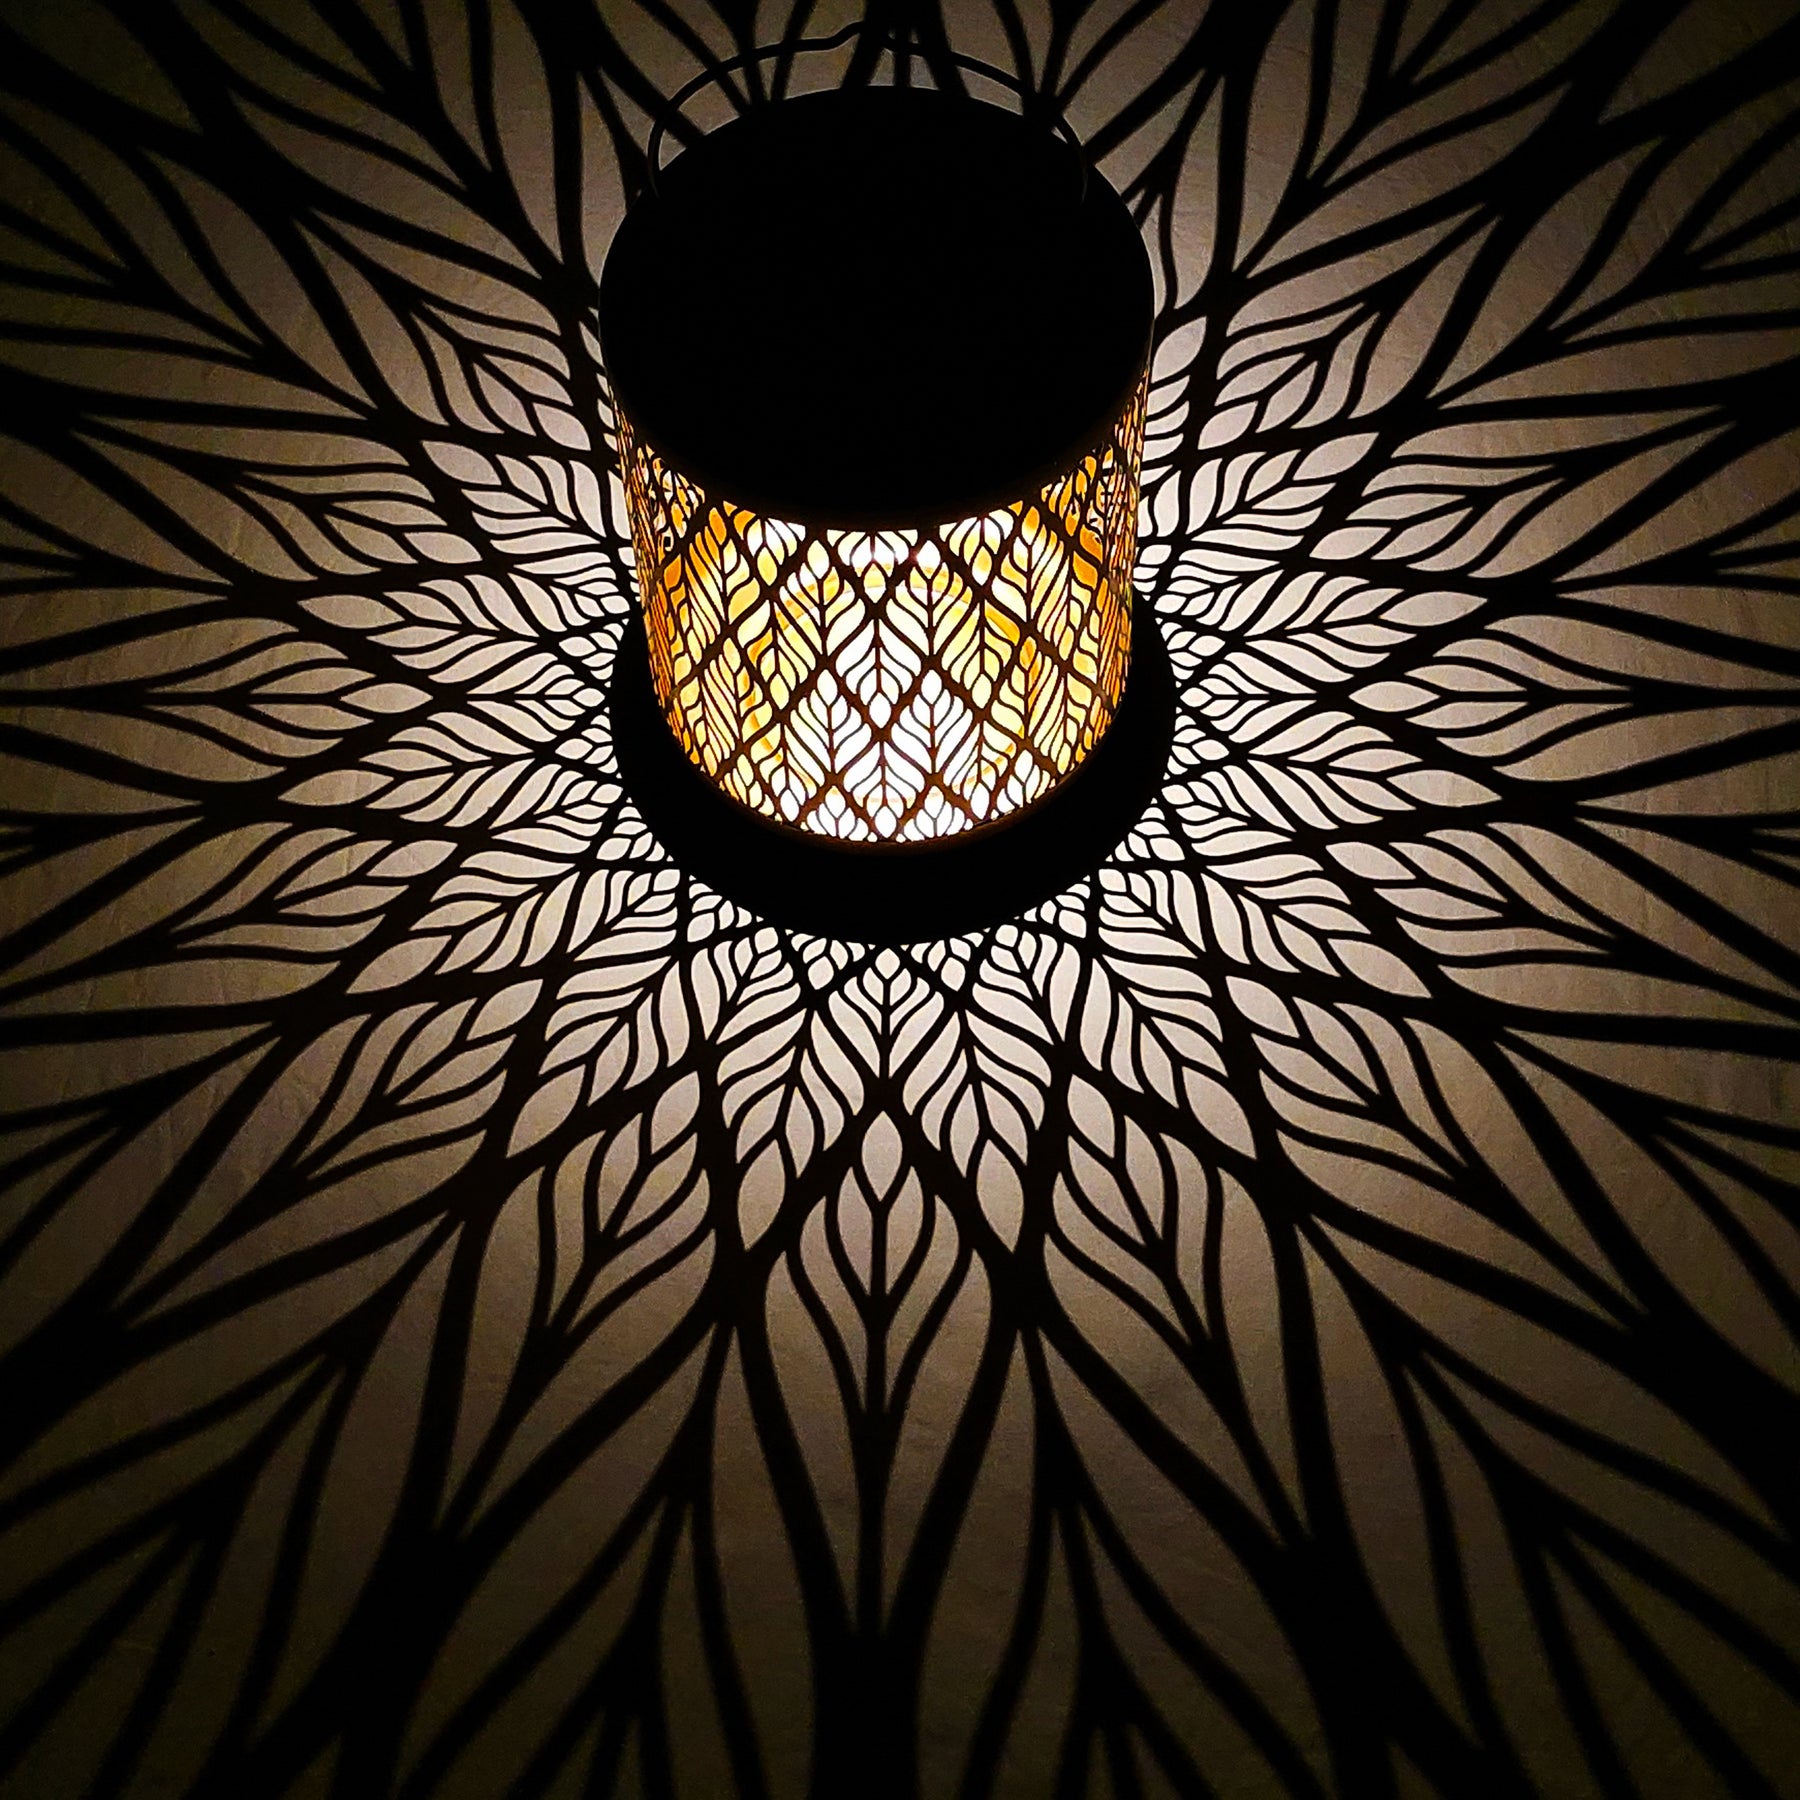 Bliss Outdoors 12-inch Tall Hanging and Tabletop Decorative Solar LED Lantern with Unique Diamond Leaf Design turned on and creating a cool pattern of light on the surface around it.